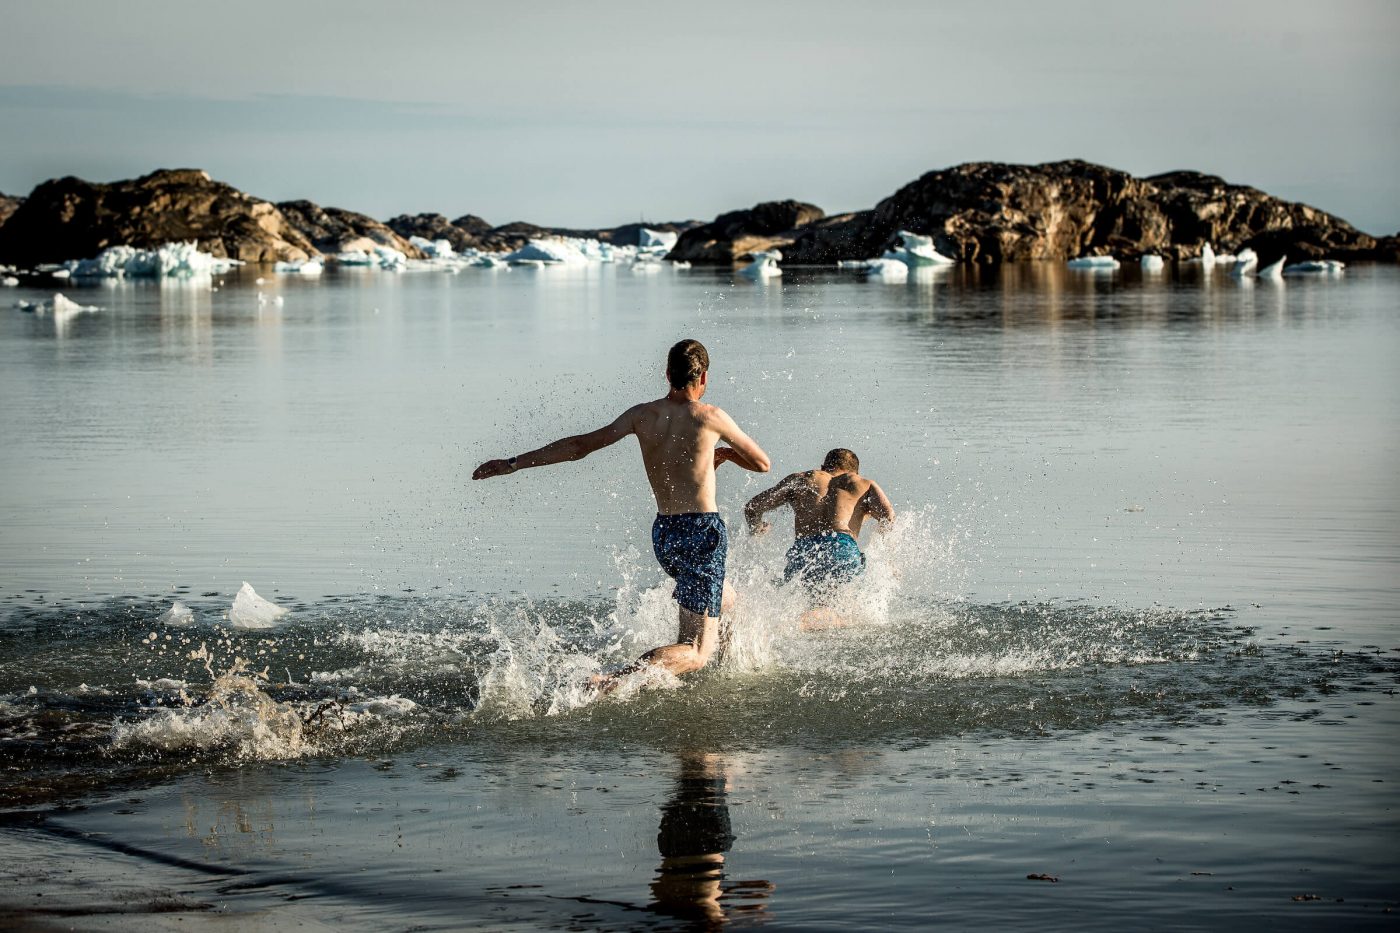 Two hikers in East Greenland going for an icy swim in Sermilik fjord. Photo by Mads Pihl